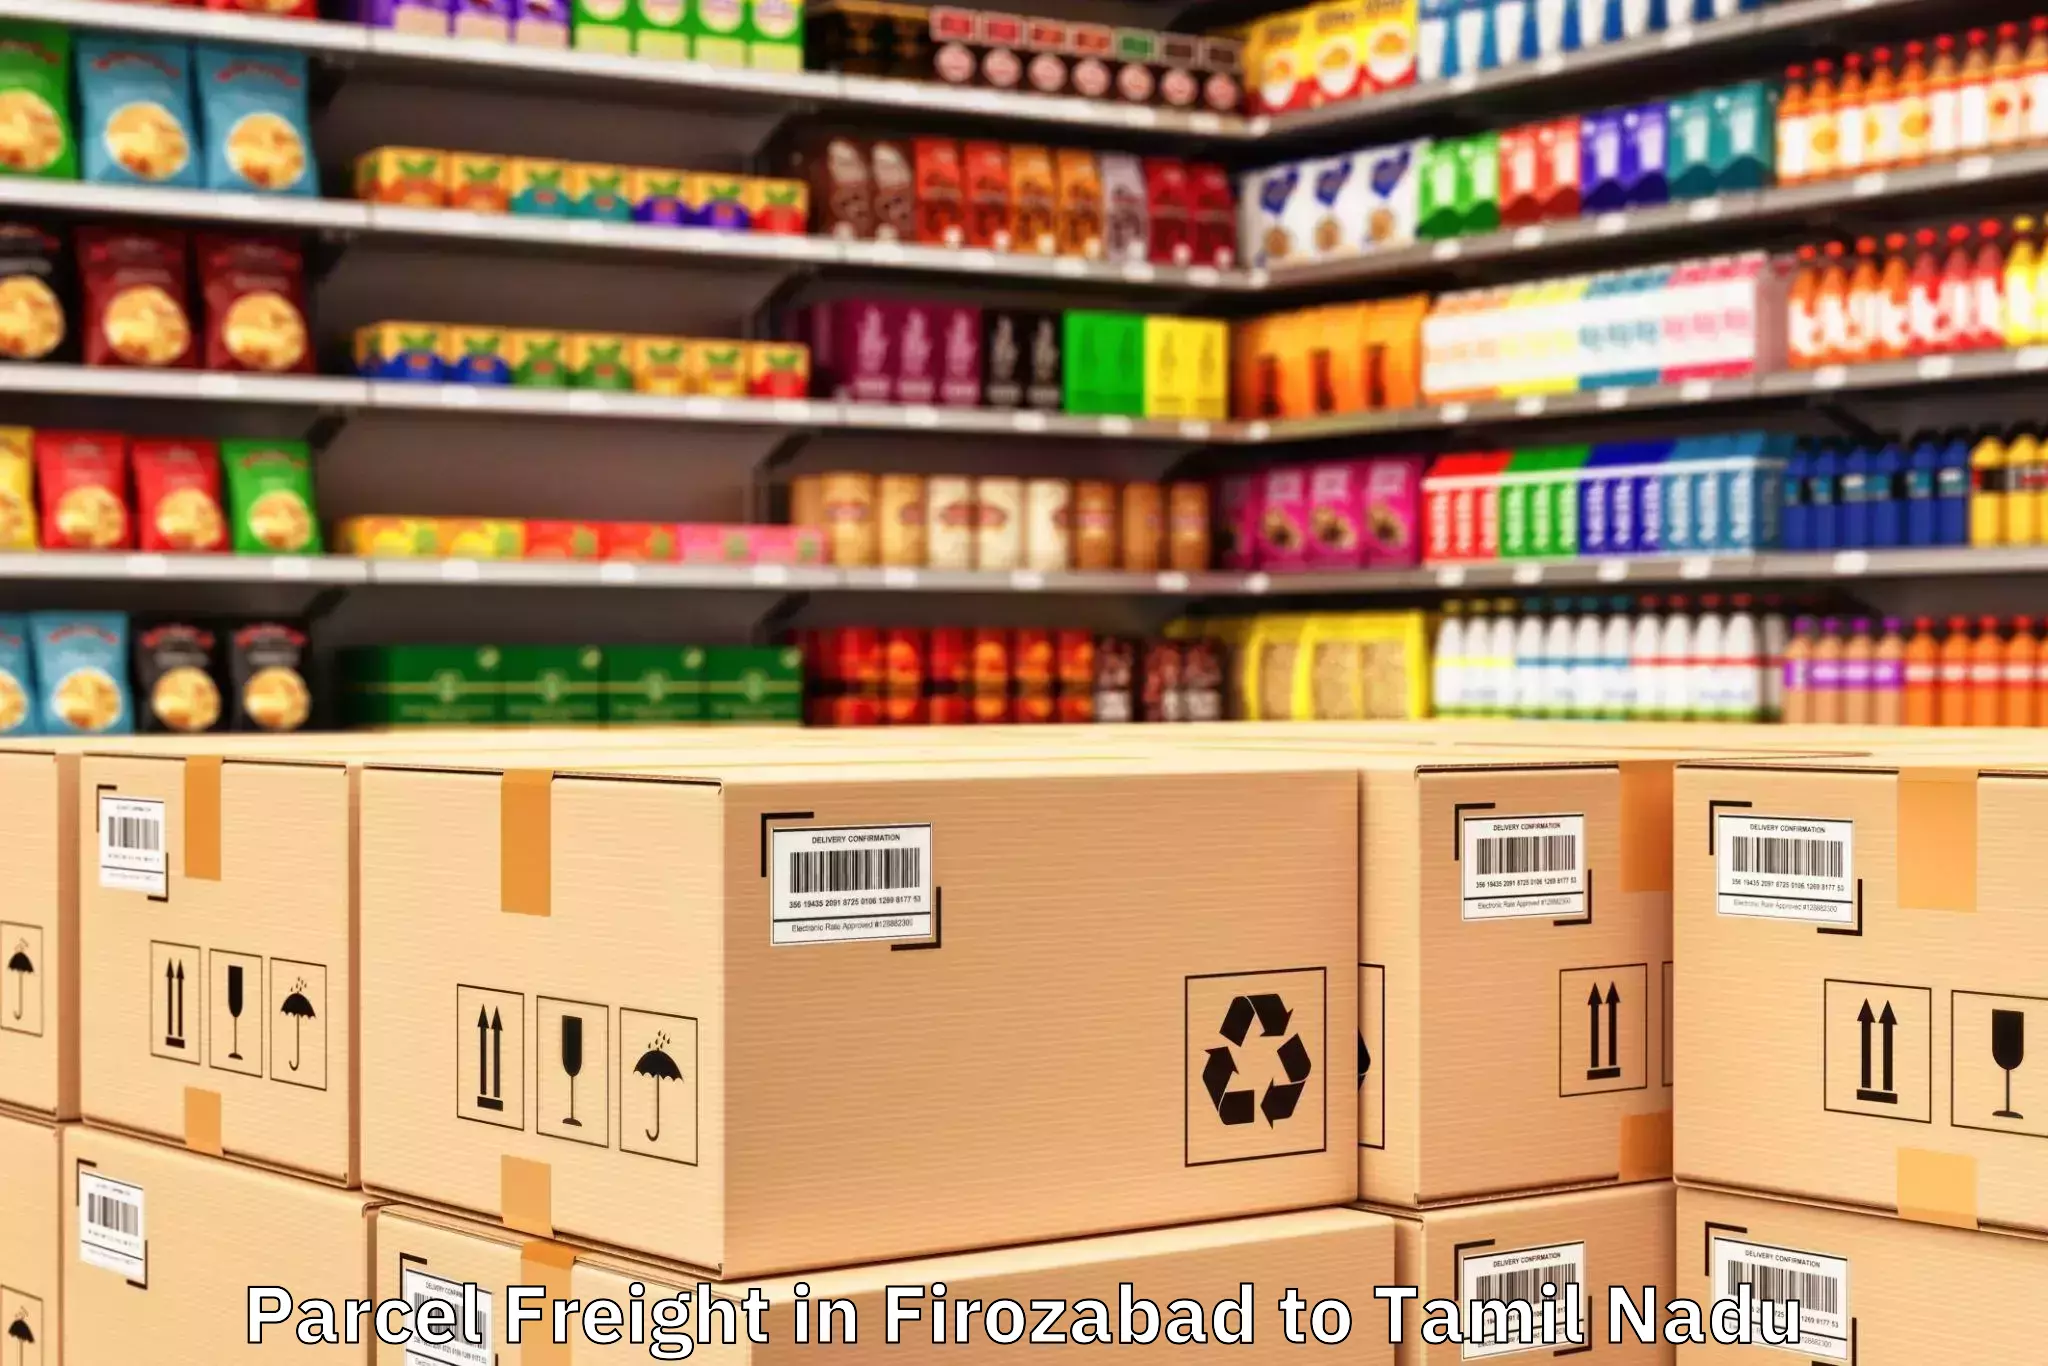 Top Firozabad to Poonamalle Parcel Freight Available